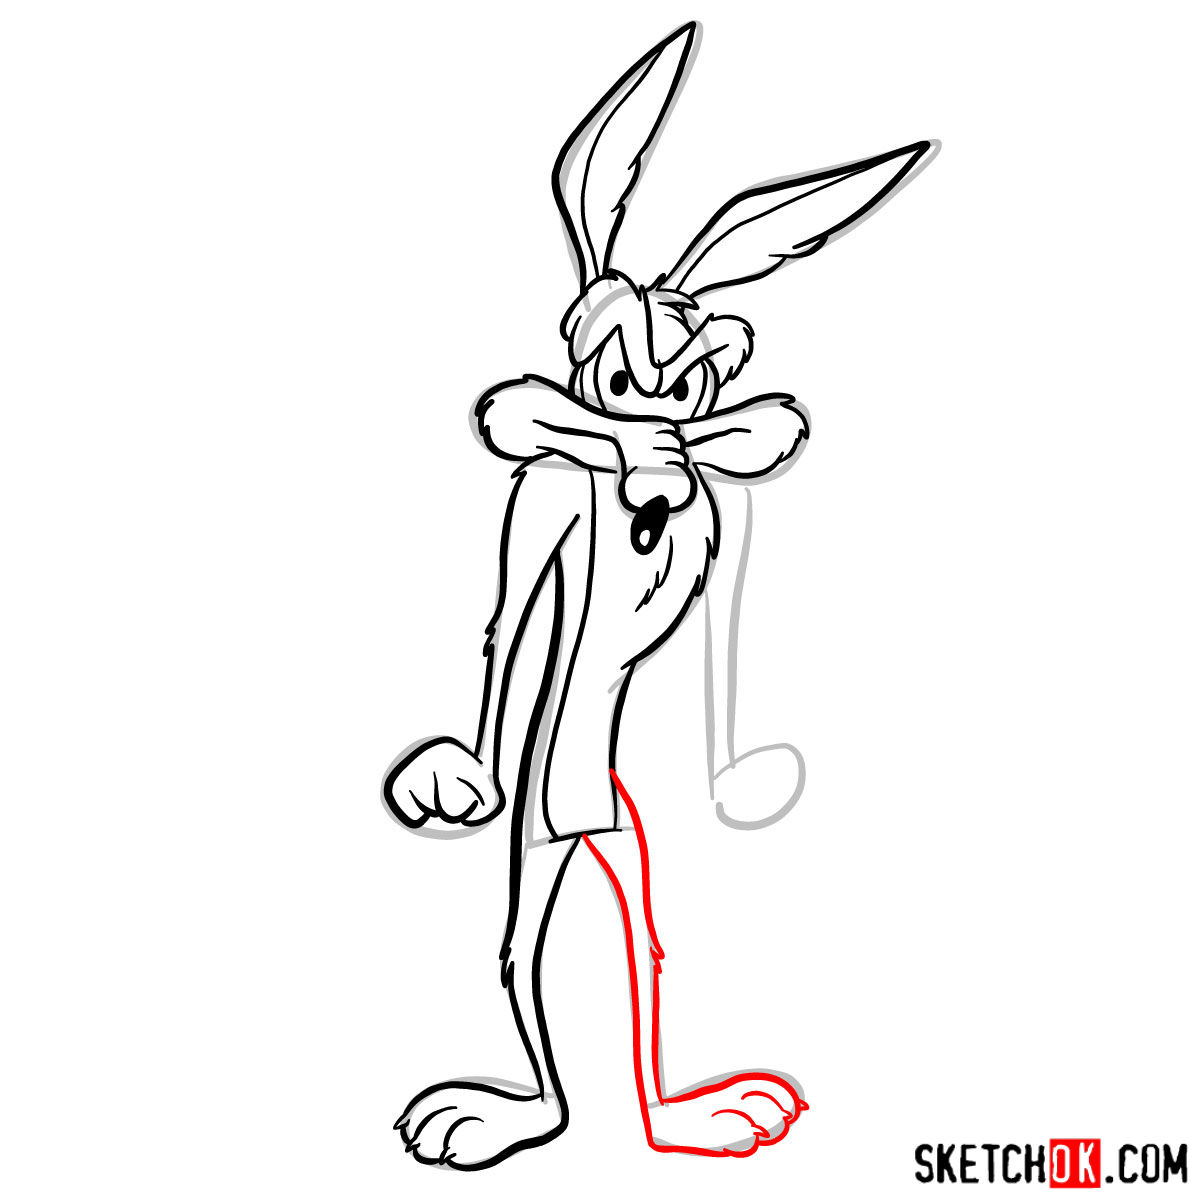 How to draw Wile E. Coyote - step 08